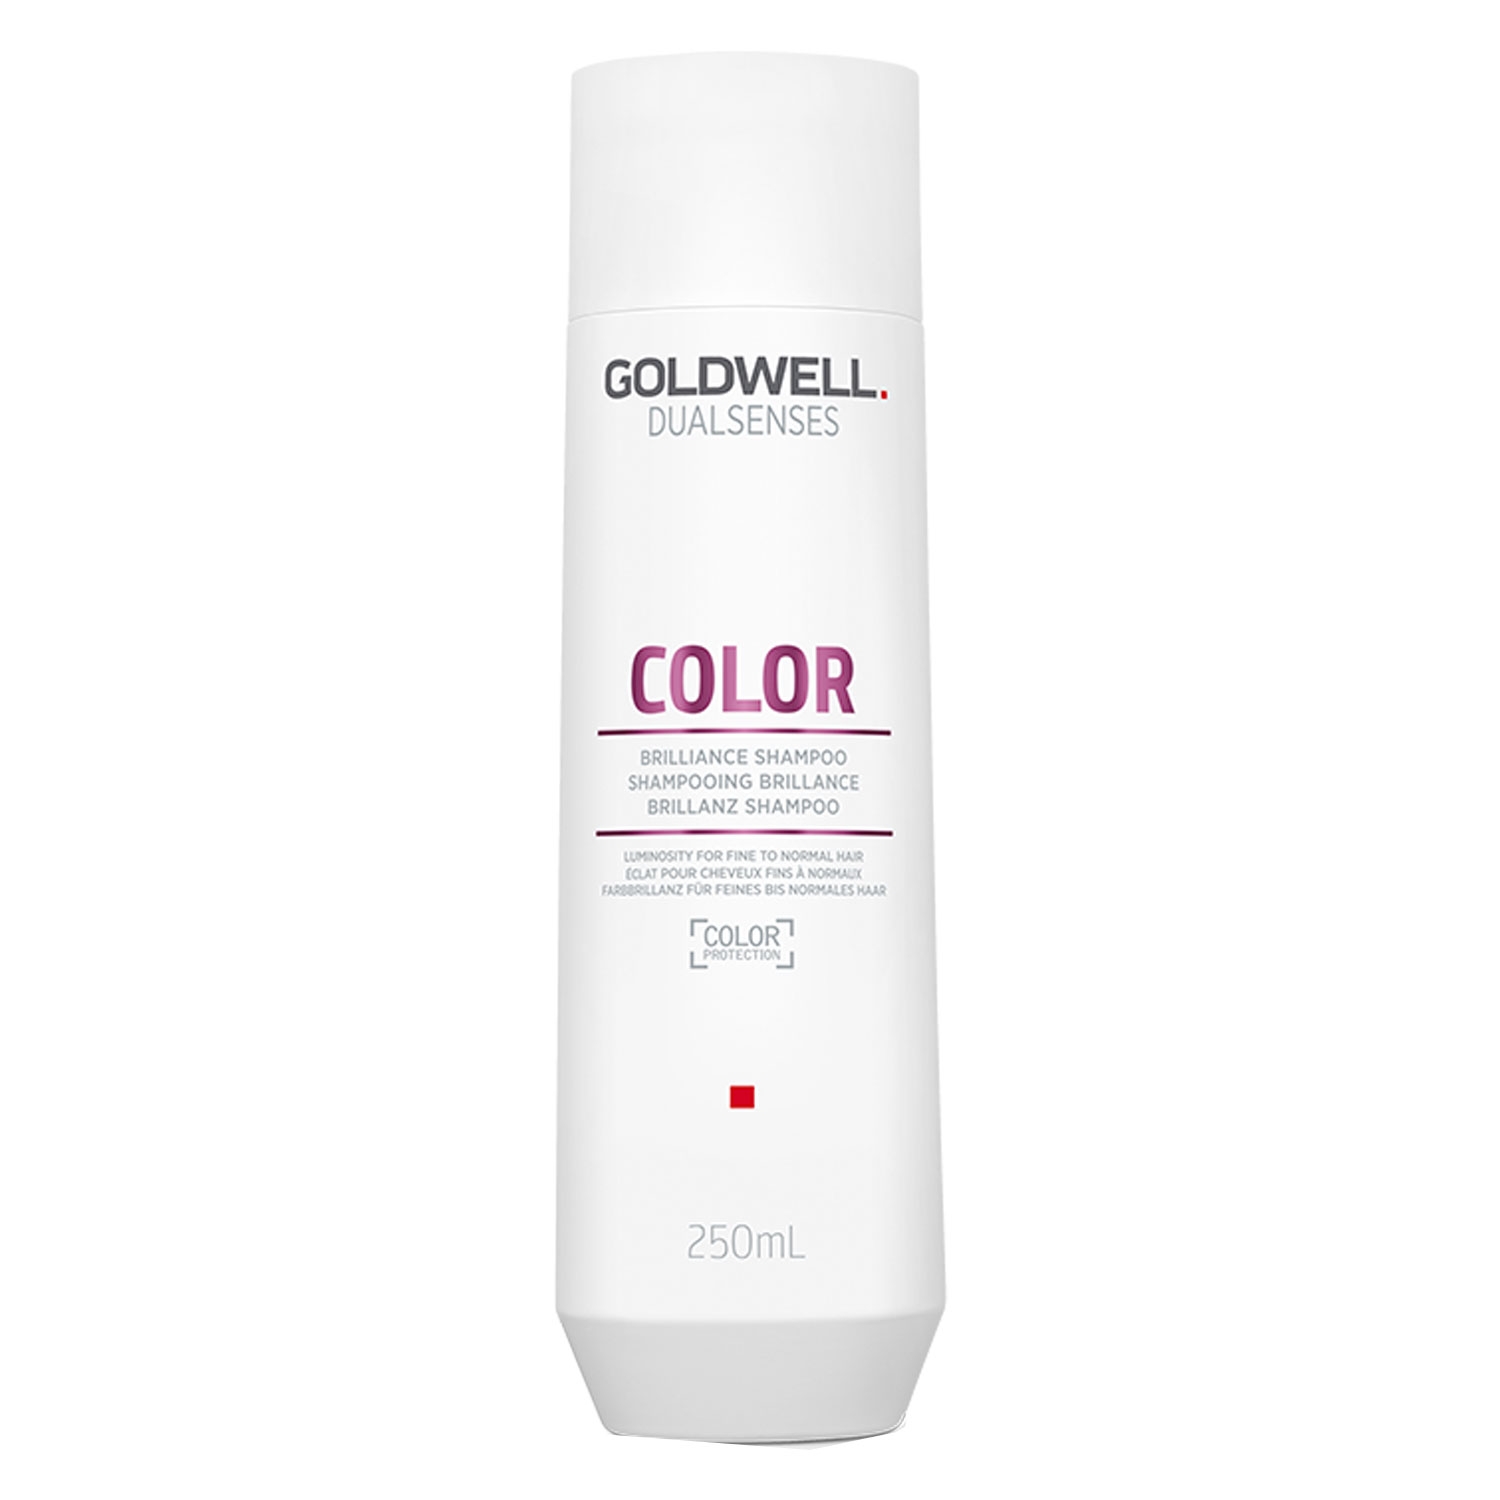 Product image from Dualsenses Color - Brilliance Shampoo